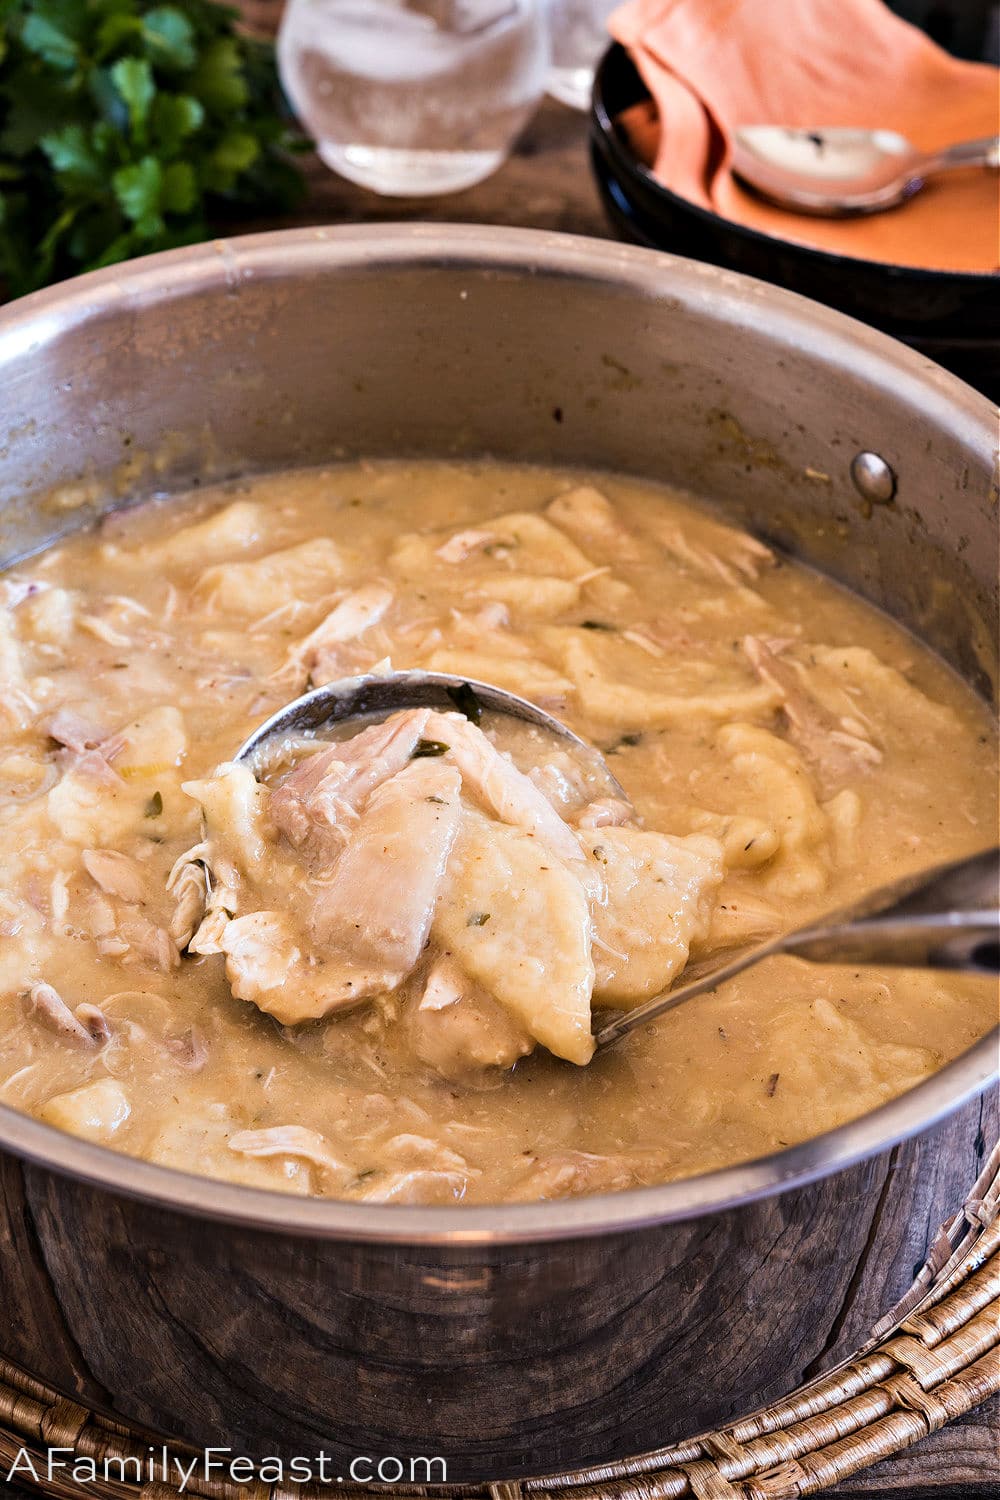 Chicken and Dumplings - A Family Feast